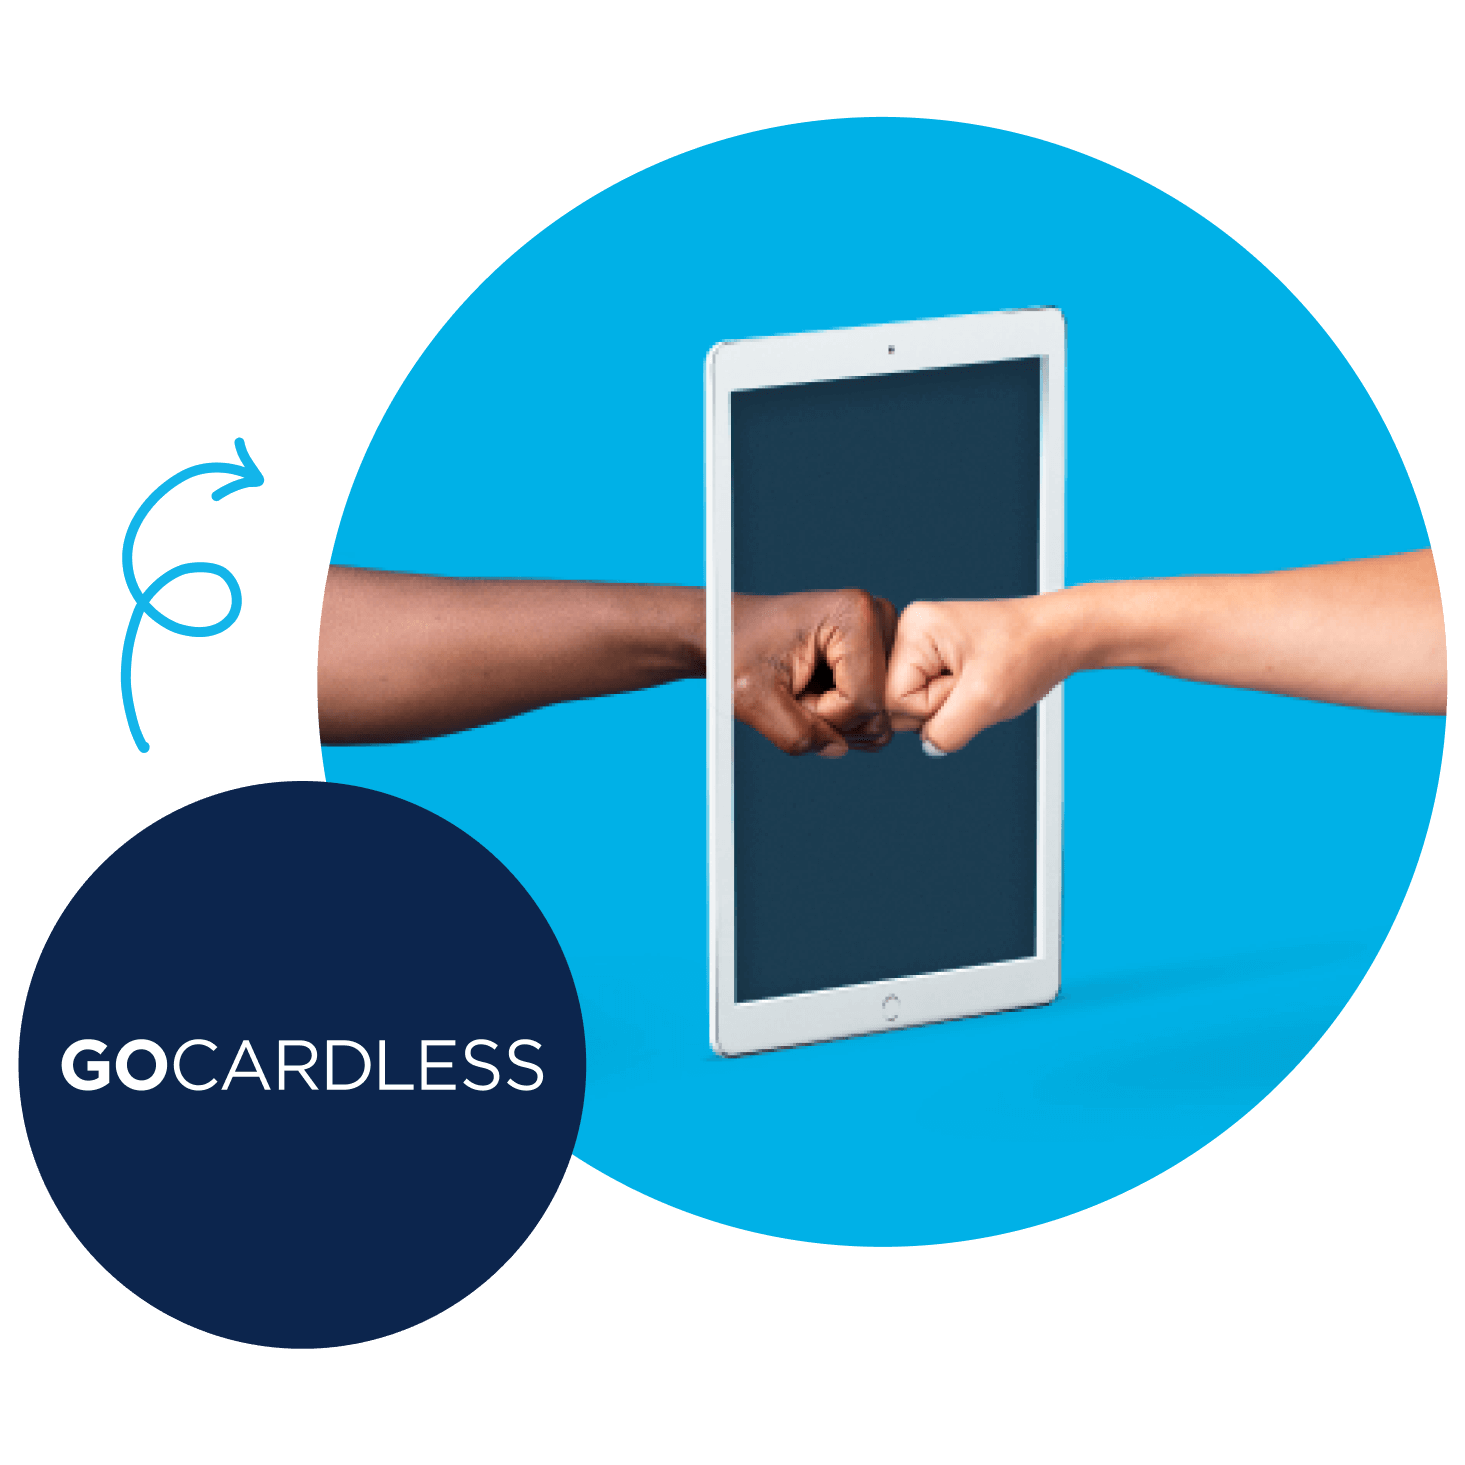 The GoCardless logo and two fists bumping on a screen represent GoCardless’s ability to let customers pay online, instantly.